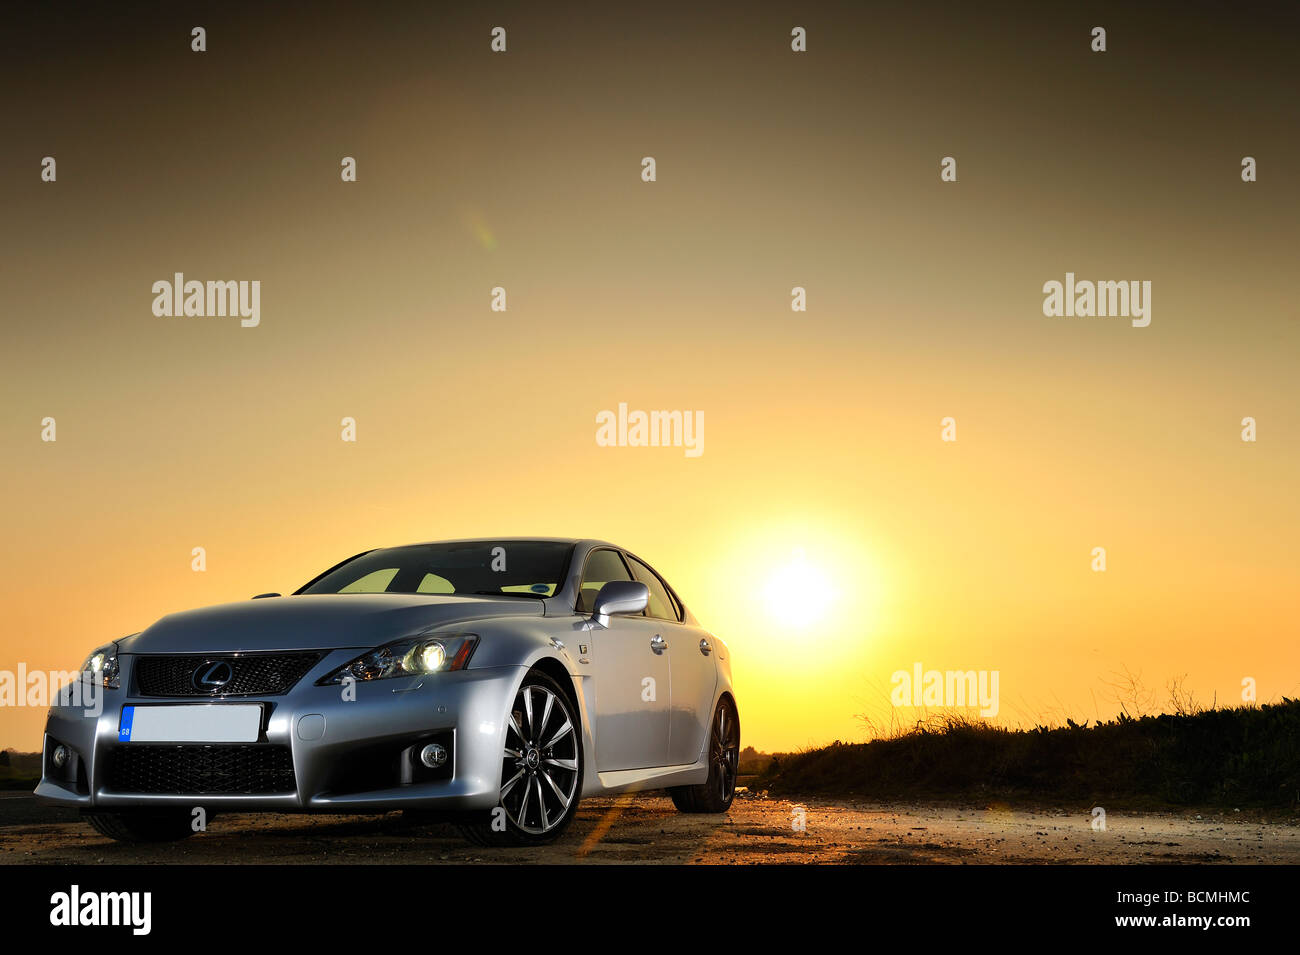 The Stunning and Powerful Lexus ISF Photographed as the Sunsets Stock Photo